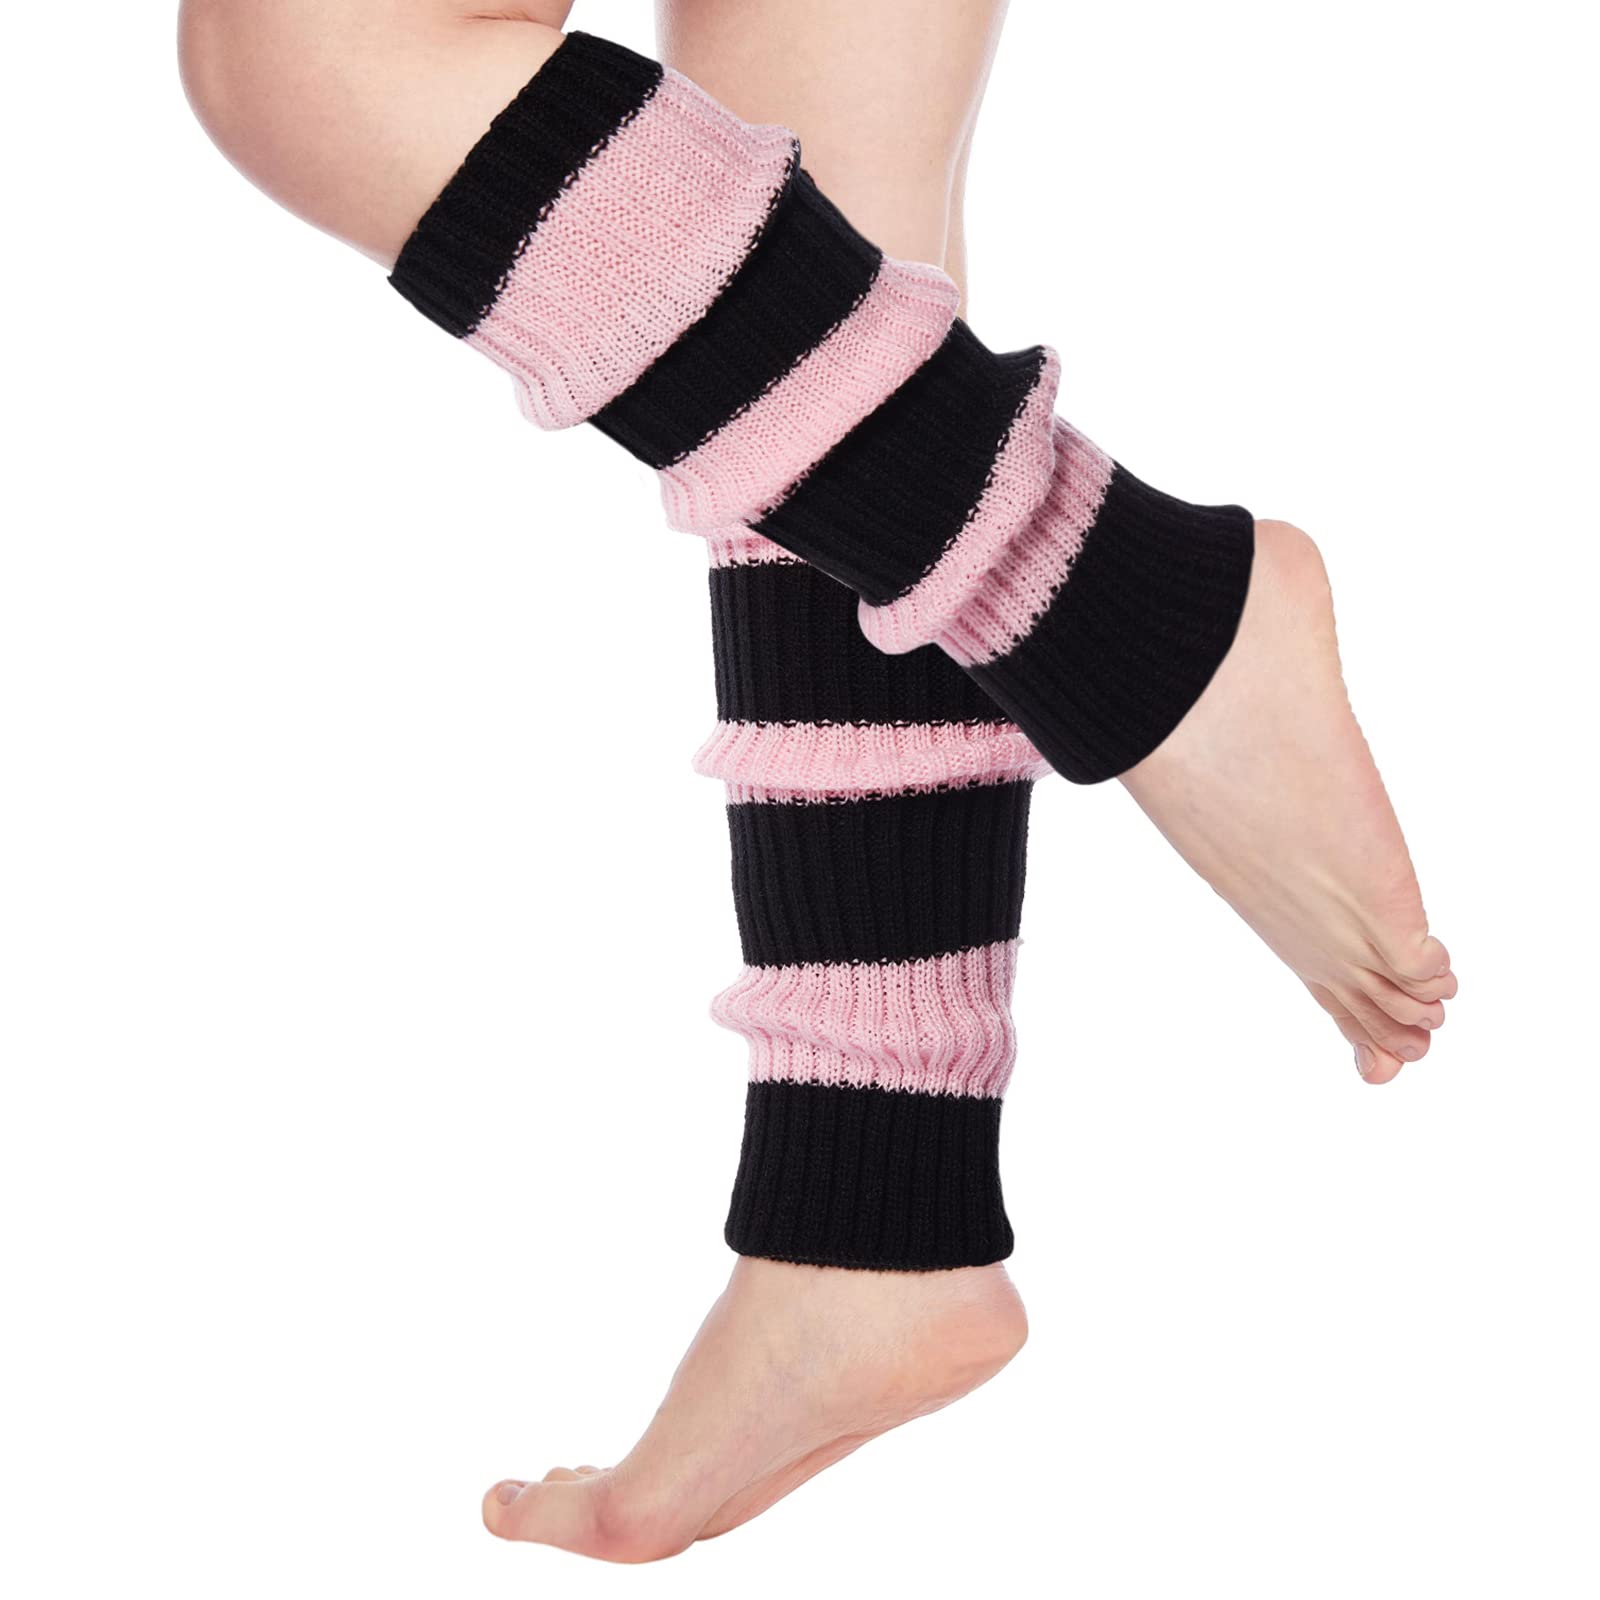 Womens Leg Warmers Neon Knitted for 80s Party Sports Yoga-Black & Light Pink - Moon Wood